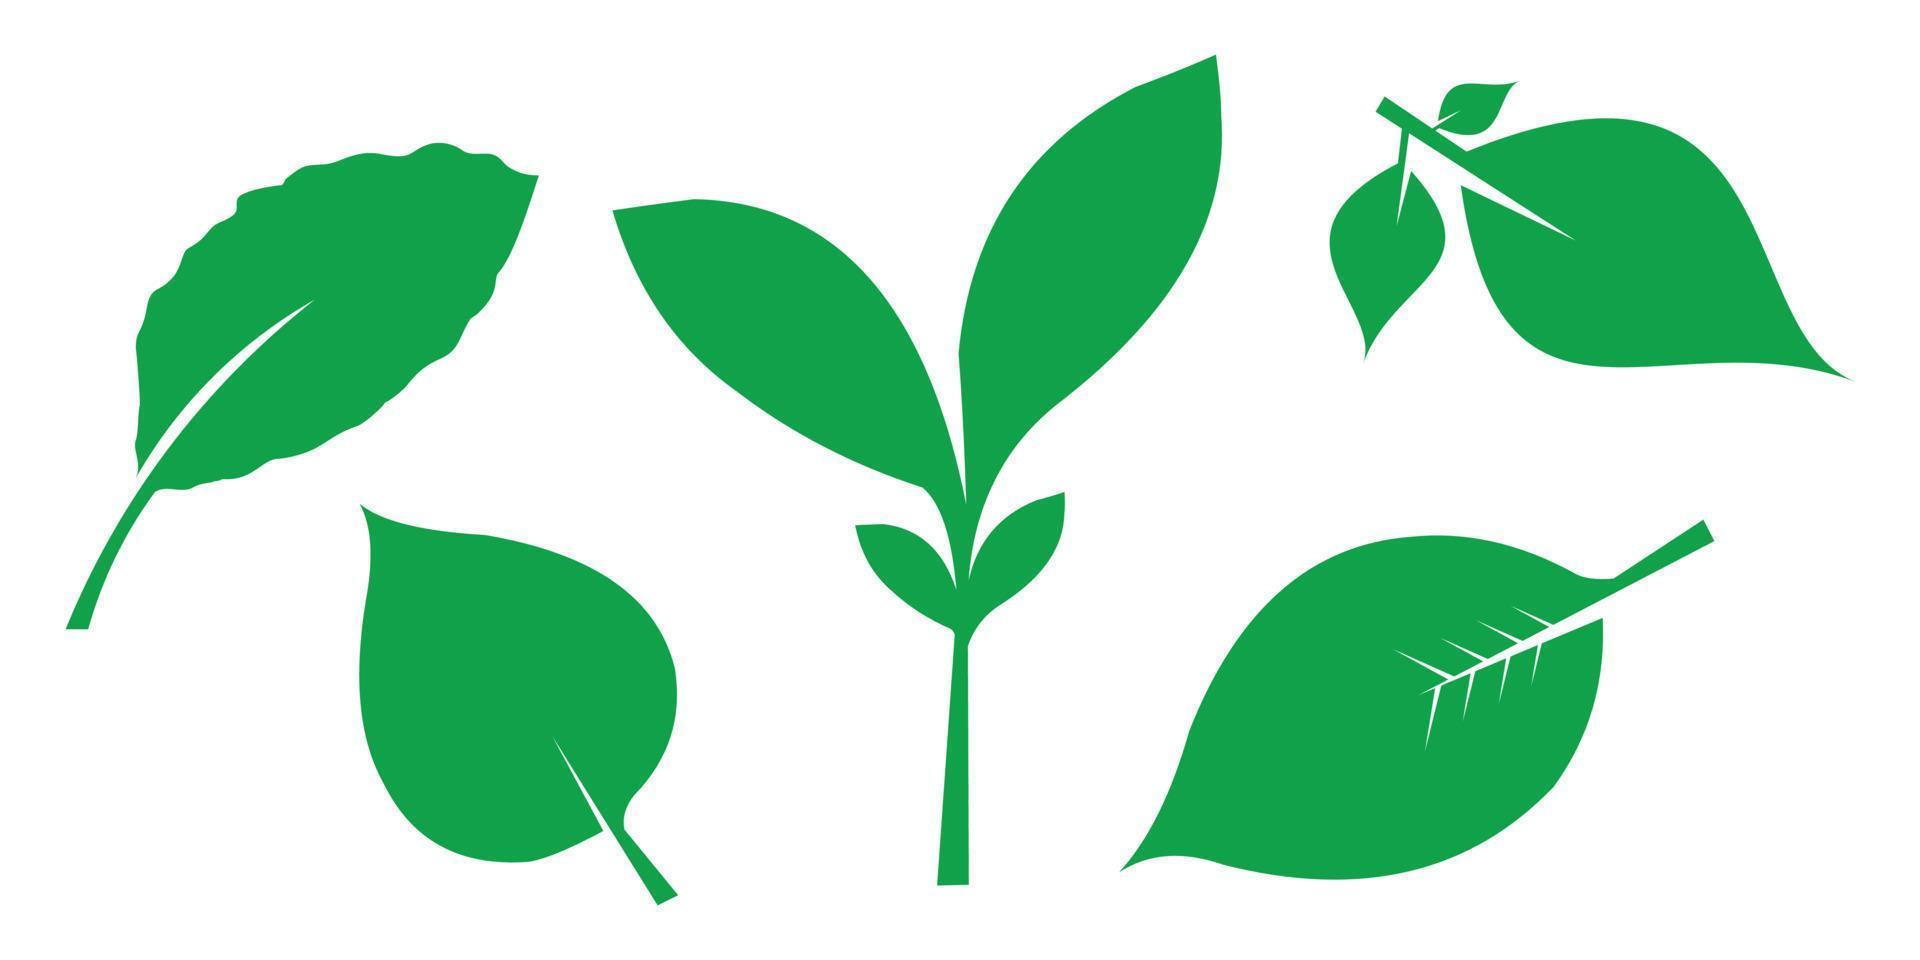 Green leaf icon set. Leaf icon. Collection of green leaves. Design elements for botanical,decoration and florist vector